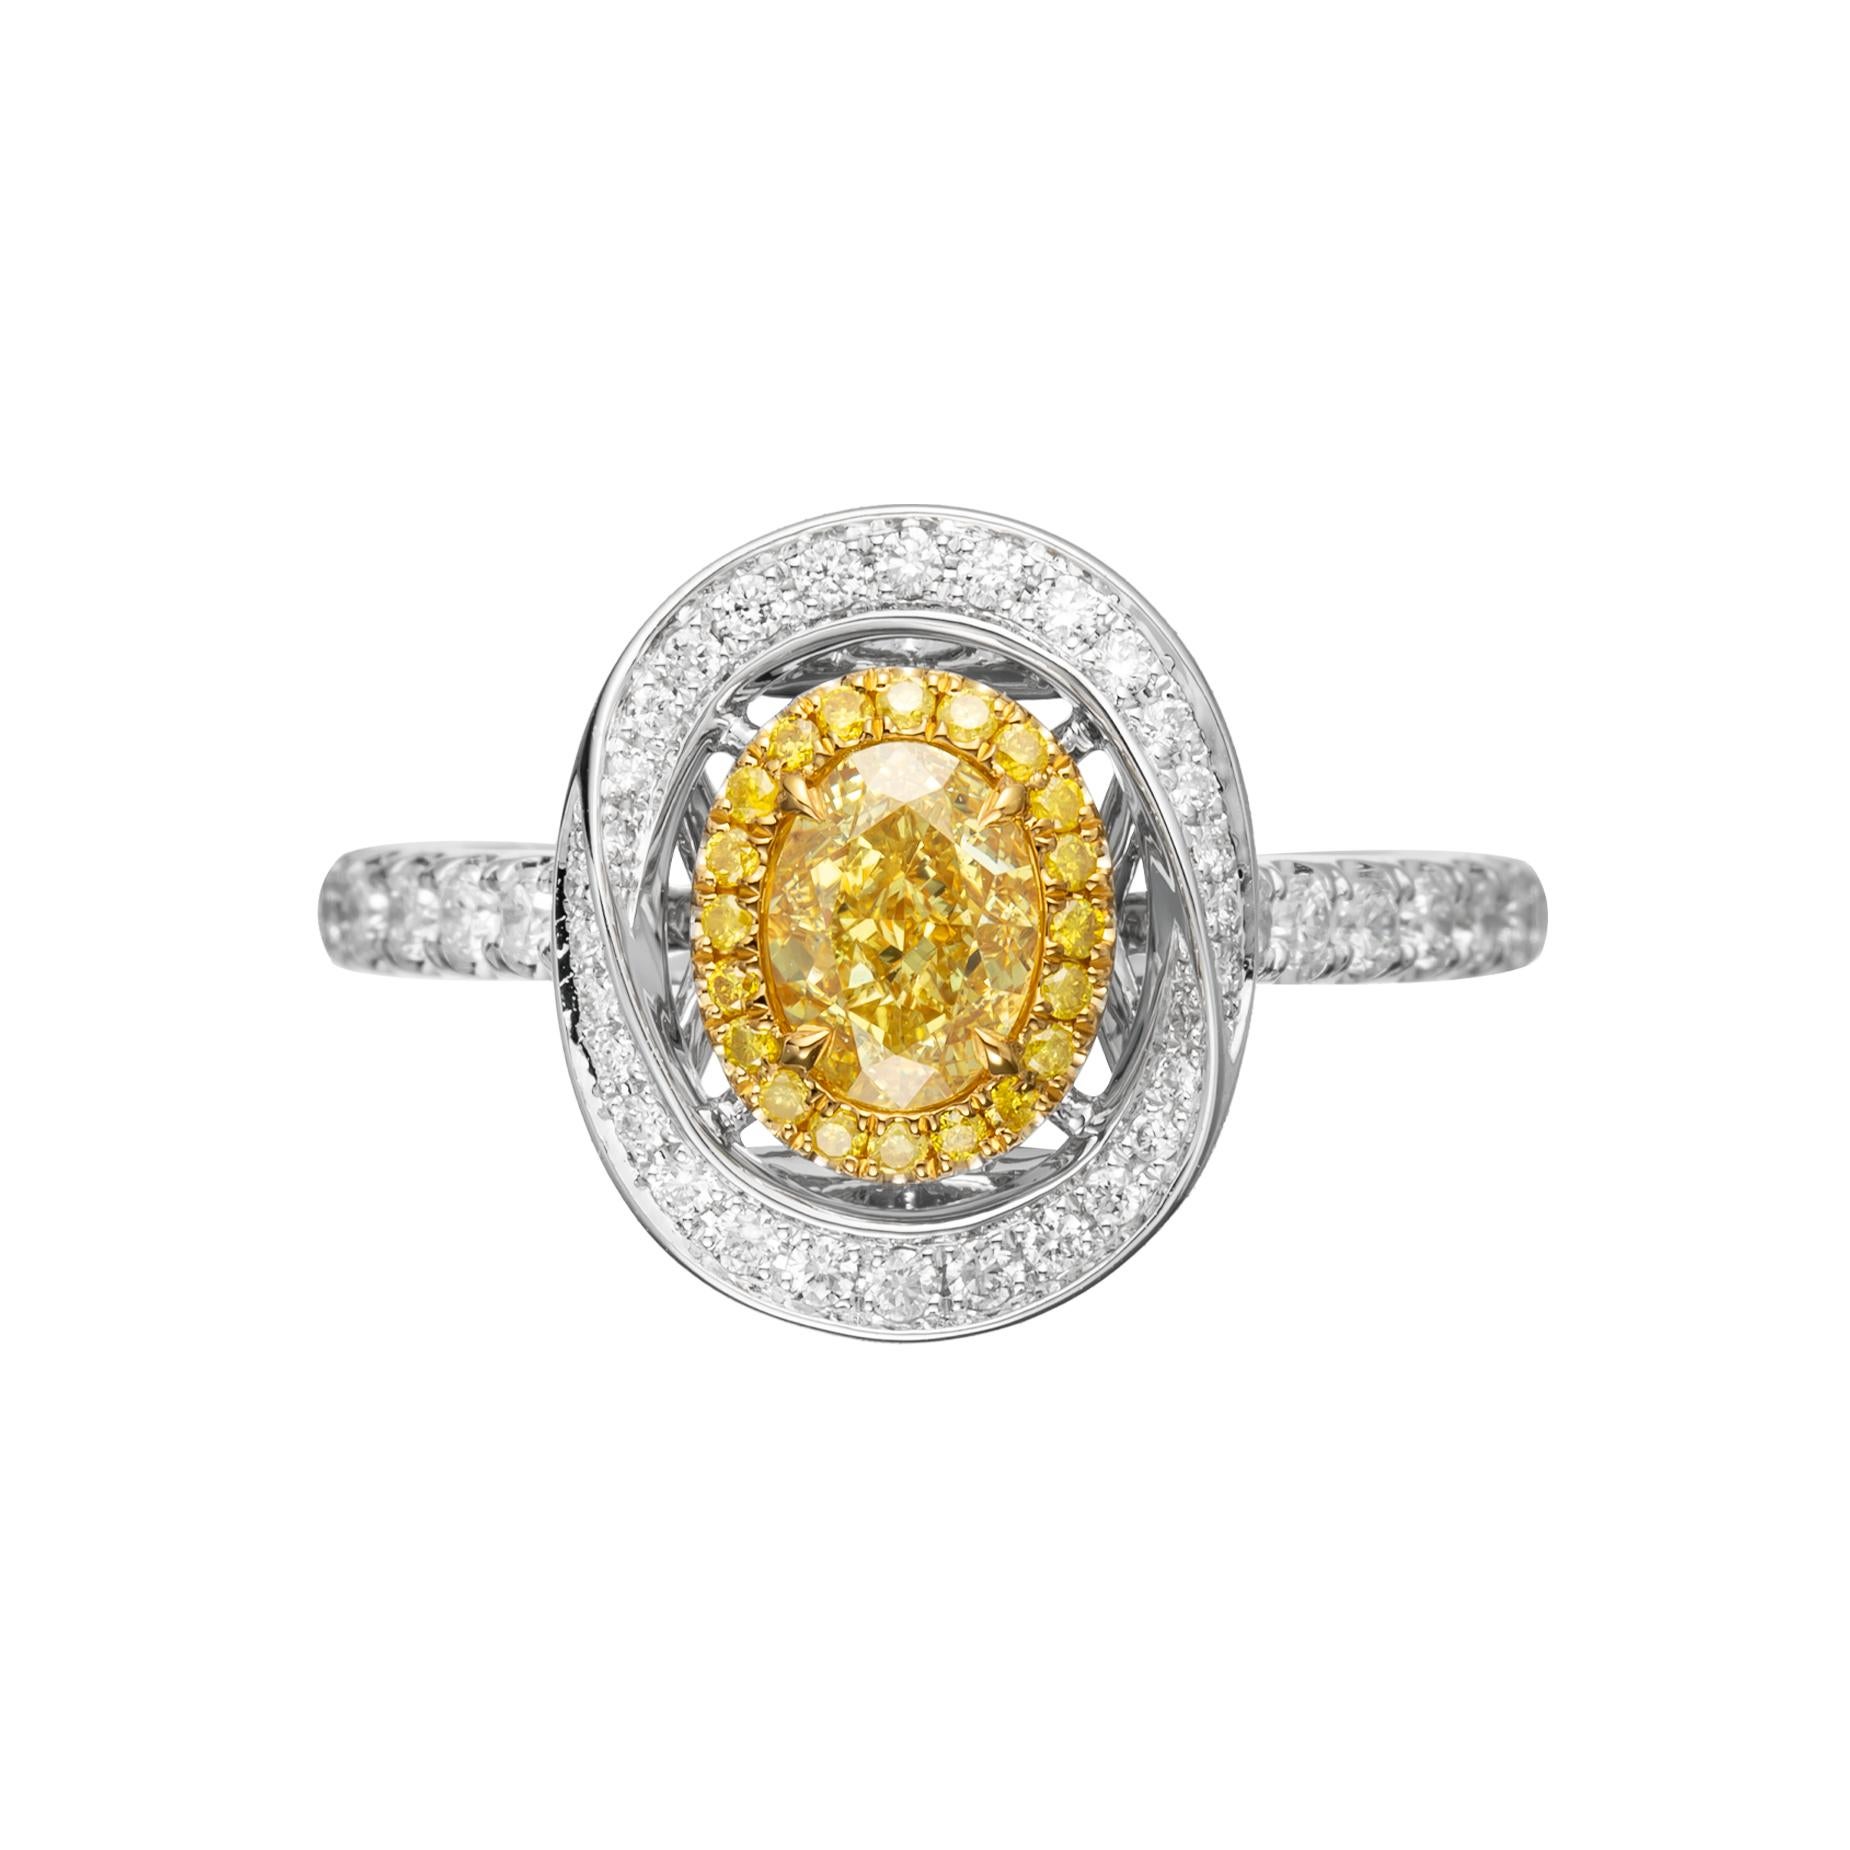 Unlock the pinnacle of luxury and love with this 0.59ct Fancy Intense Yellow natural oval-shaped diamond ring in resplendent 18kt gold. A symbol of enduring commitment, this masterpiece is the perfect gift for wedding and engagement ceremonies,